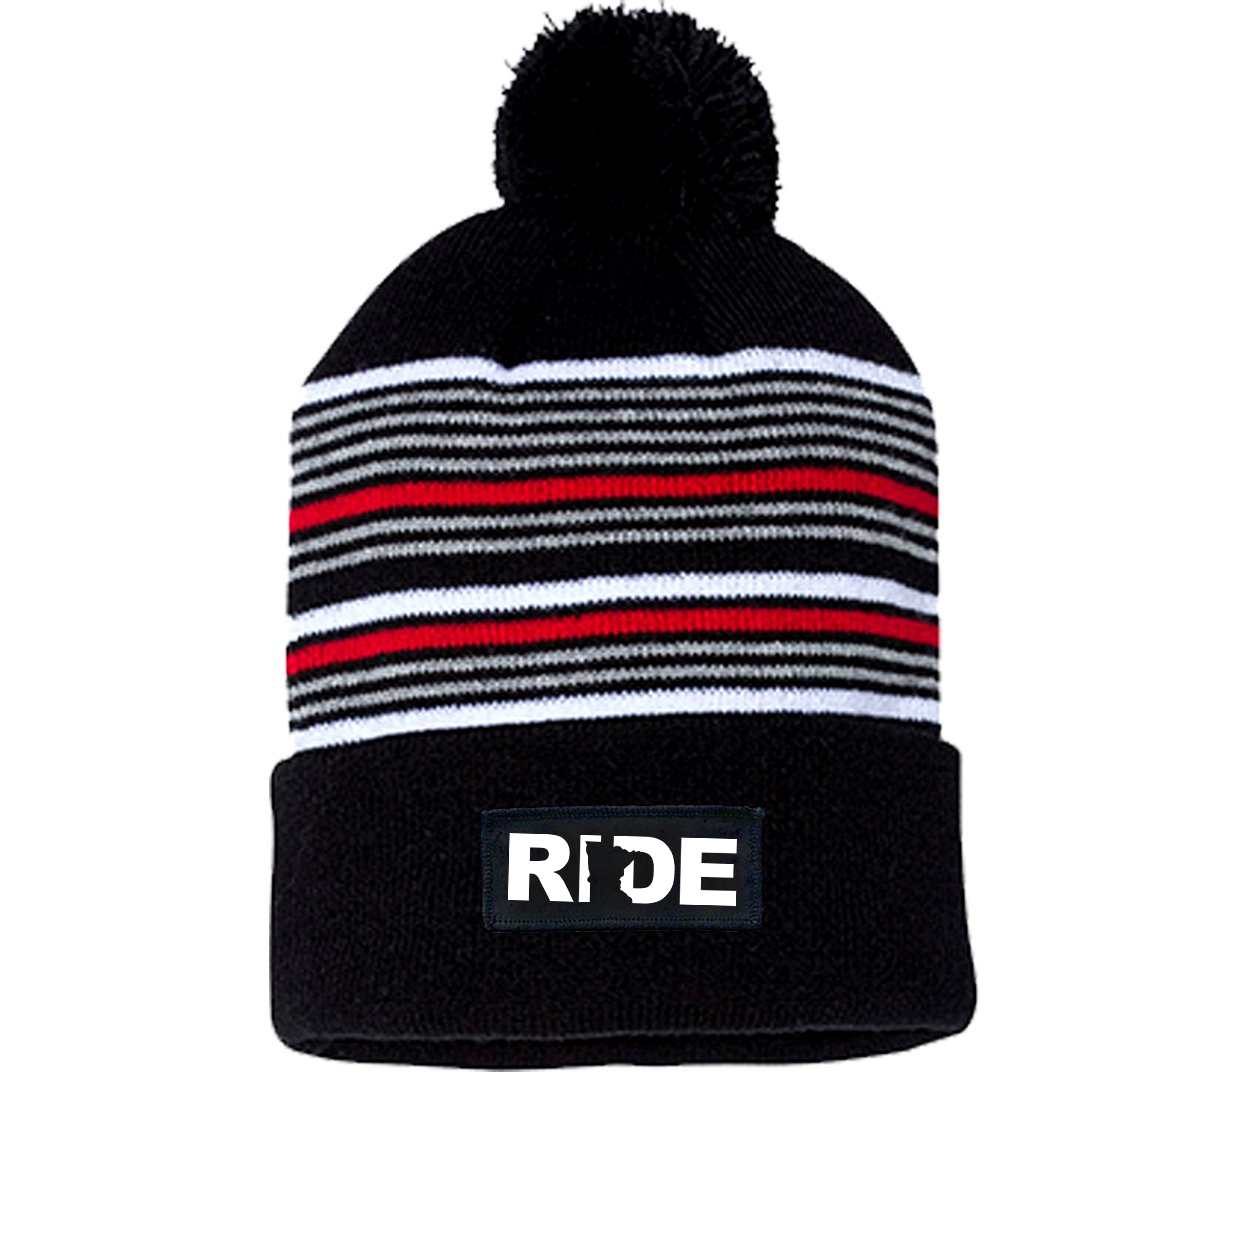 Ride Minnesota Night Out Woven Patch Roll Up Pom Knit Beanie Black/ White/ Grey/ Red Beanie (White Logo)